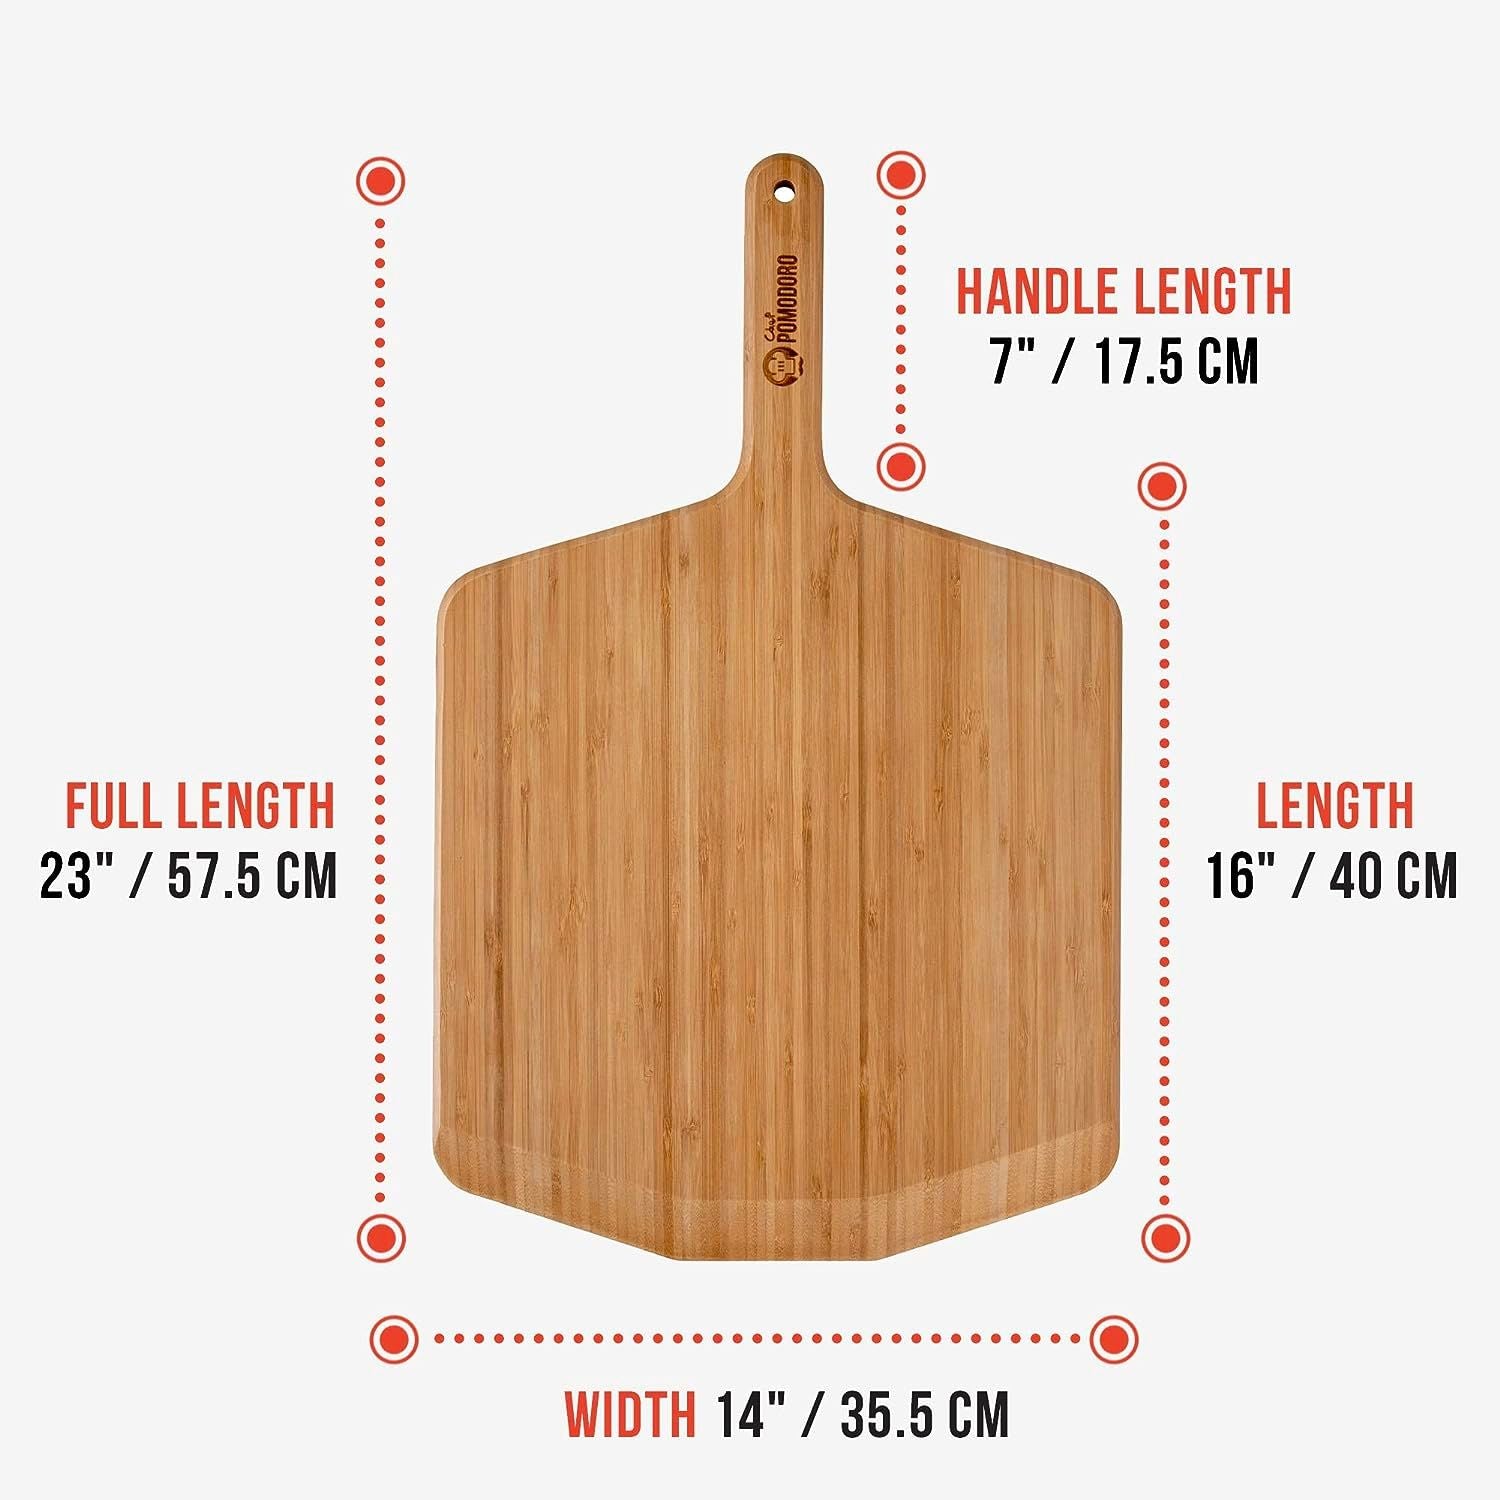 Dimensions of bamboo pizza peel